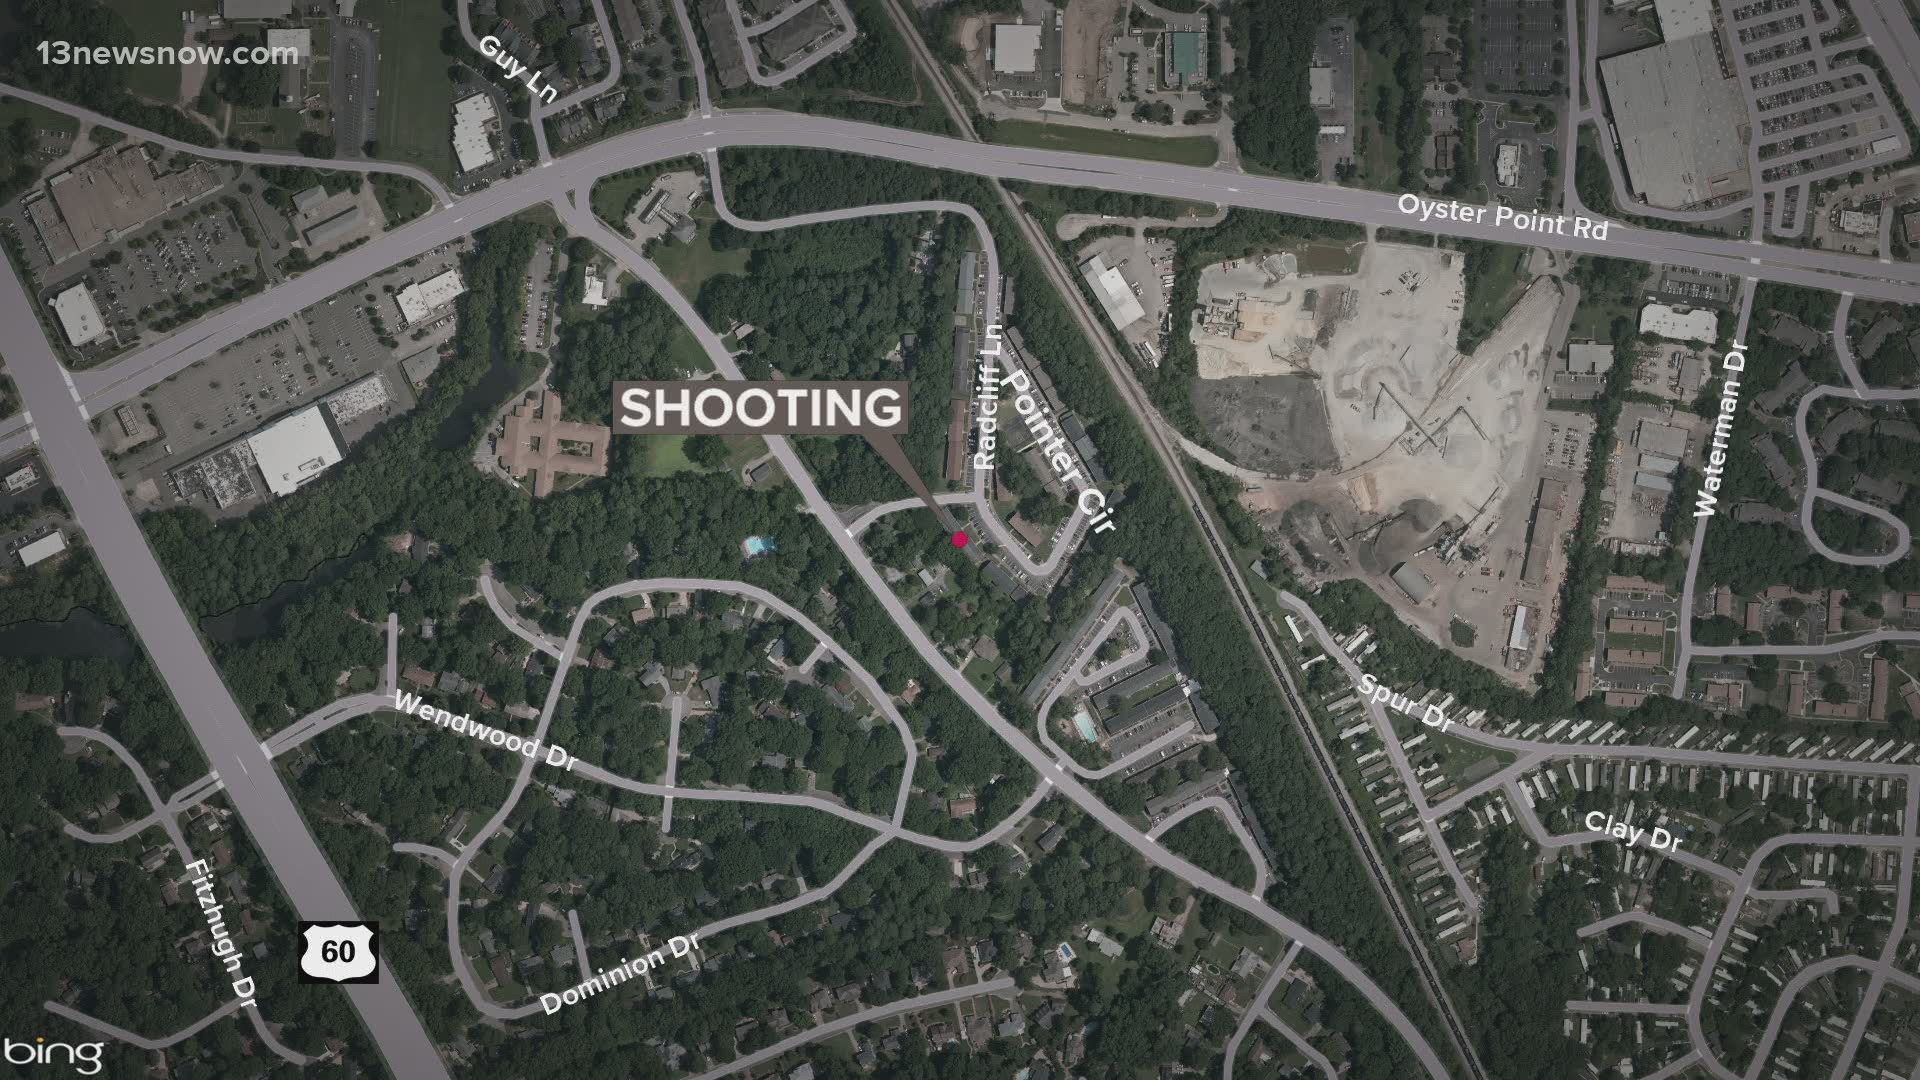 Newport News Police Department said a man was fatally shot in the 200 block of Pointer Circle.